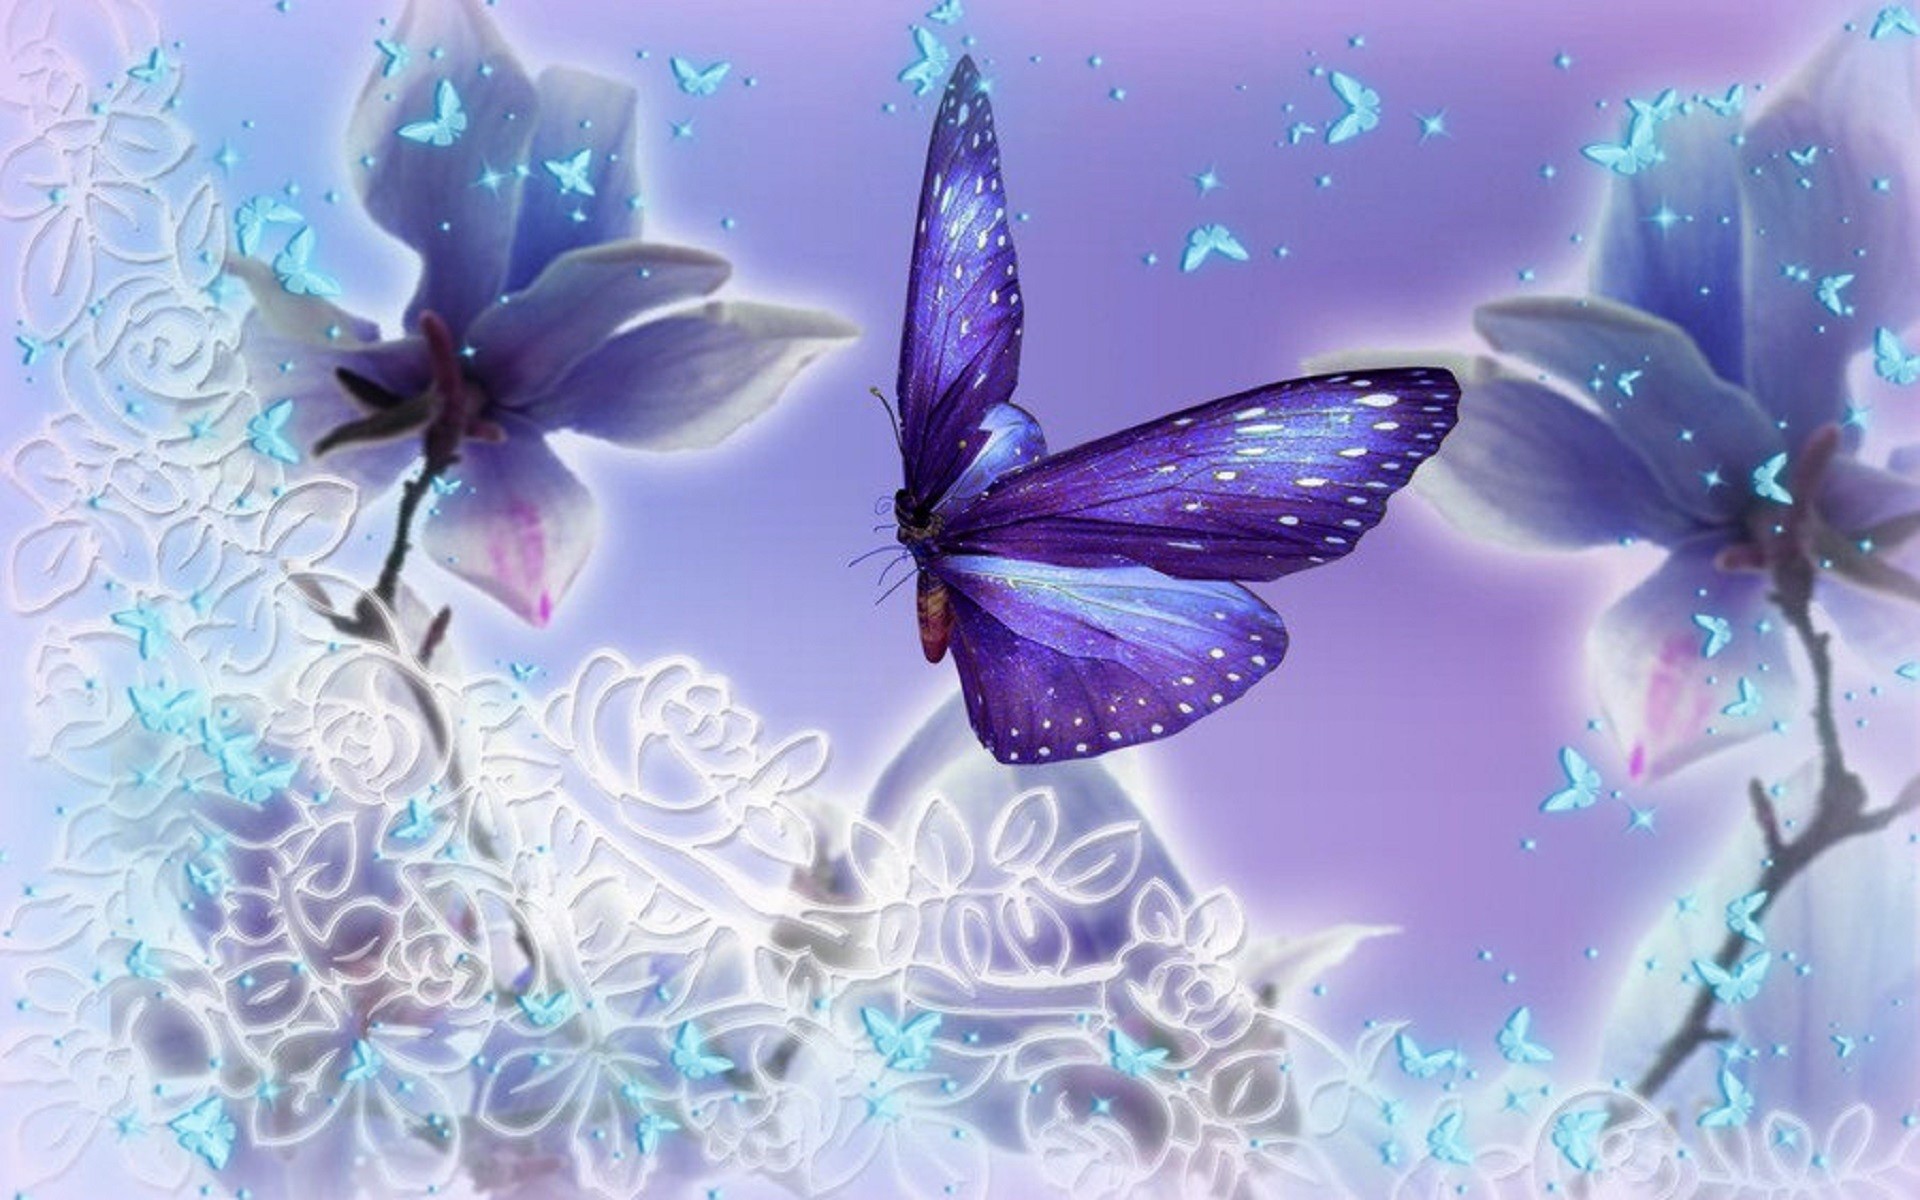 Download Purple Butterfly Wallpaper Images N1s 1920x1200 Px 448 80 Kb 1920x1200